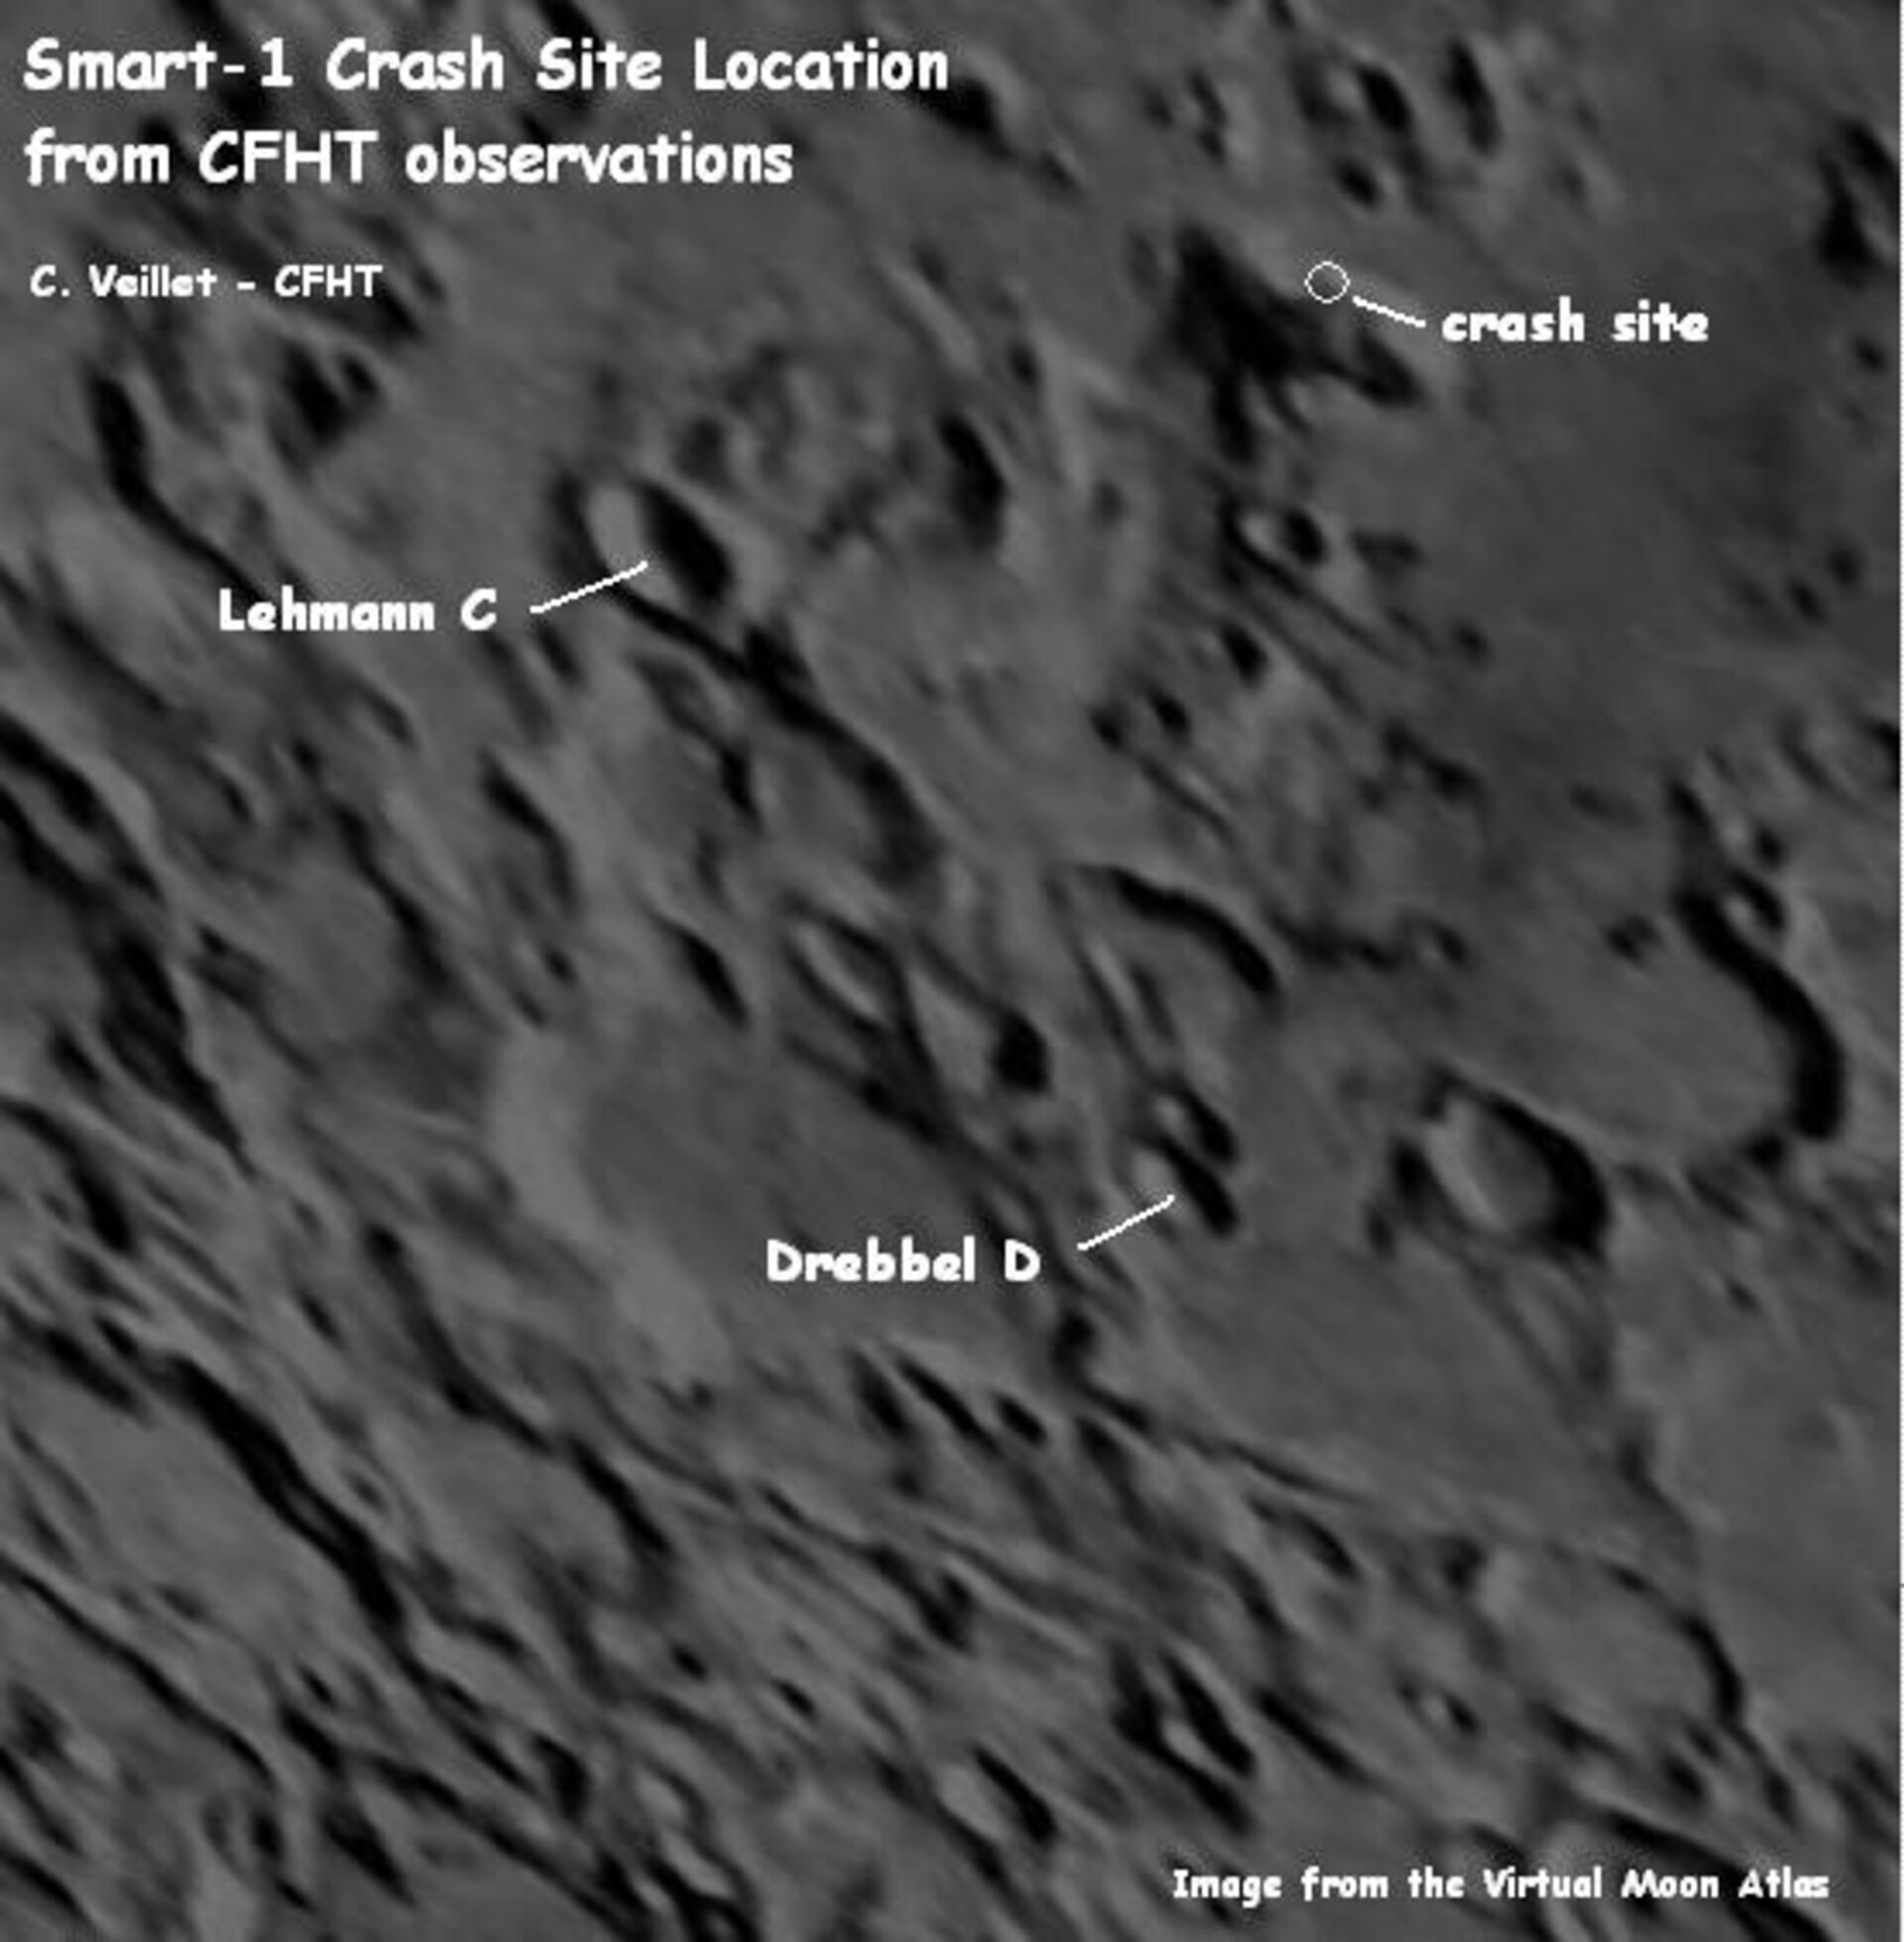 Location of SMART-1 impact by CFHT